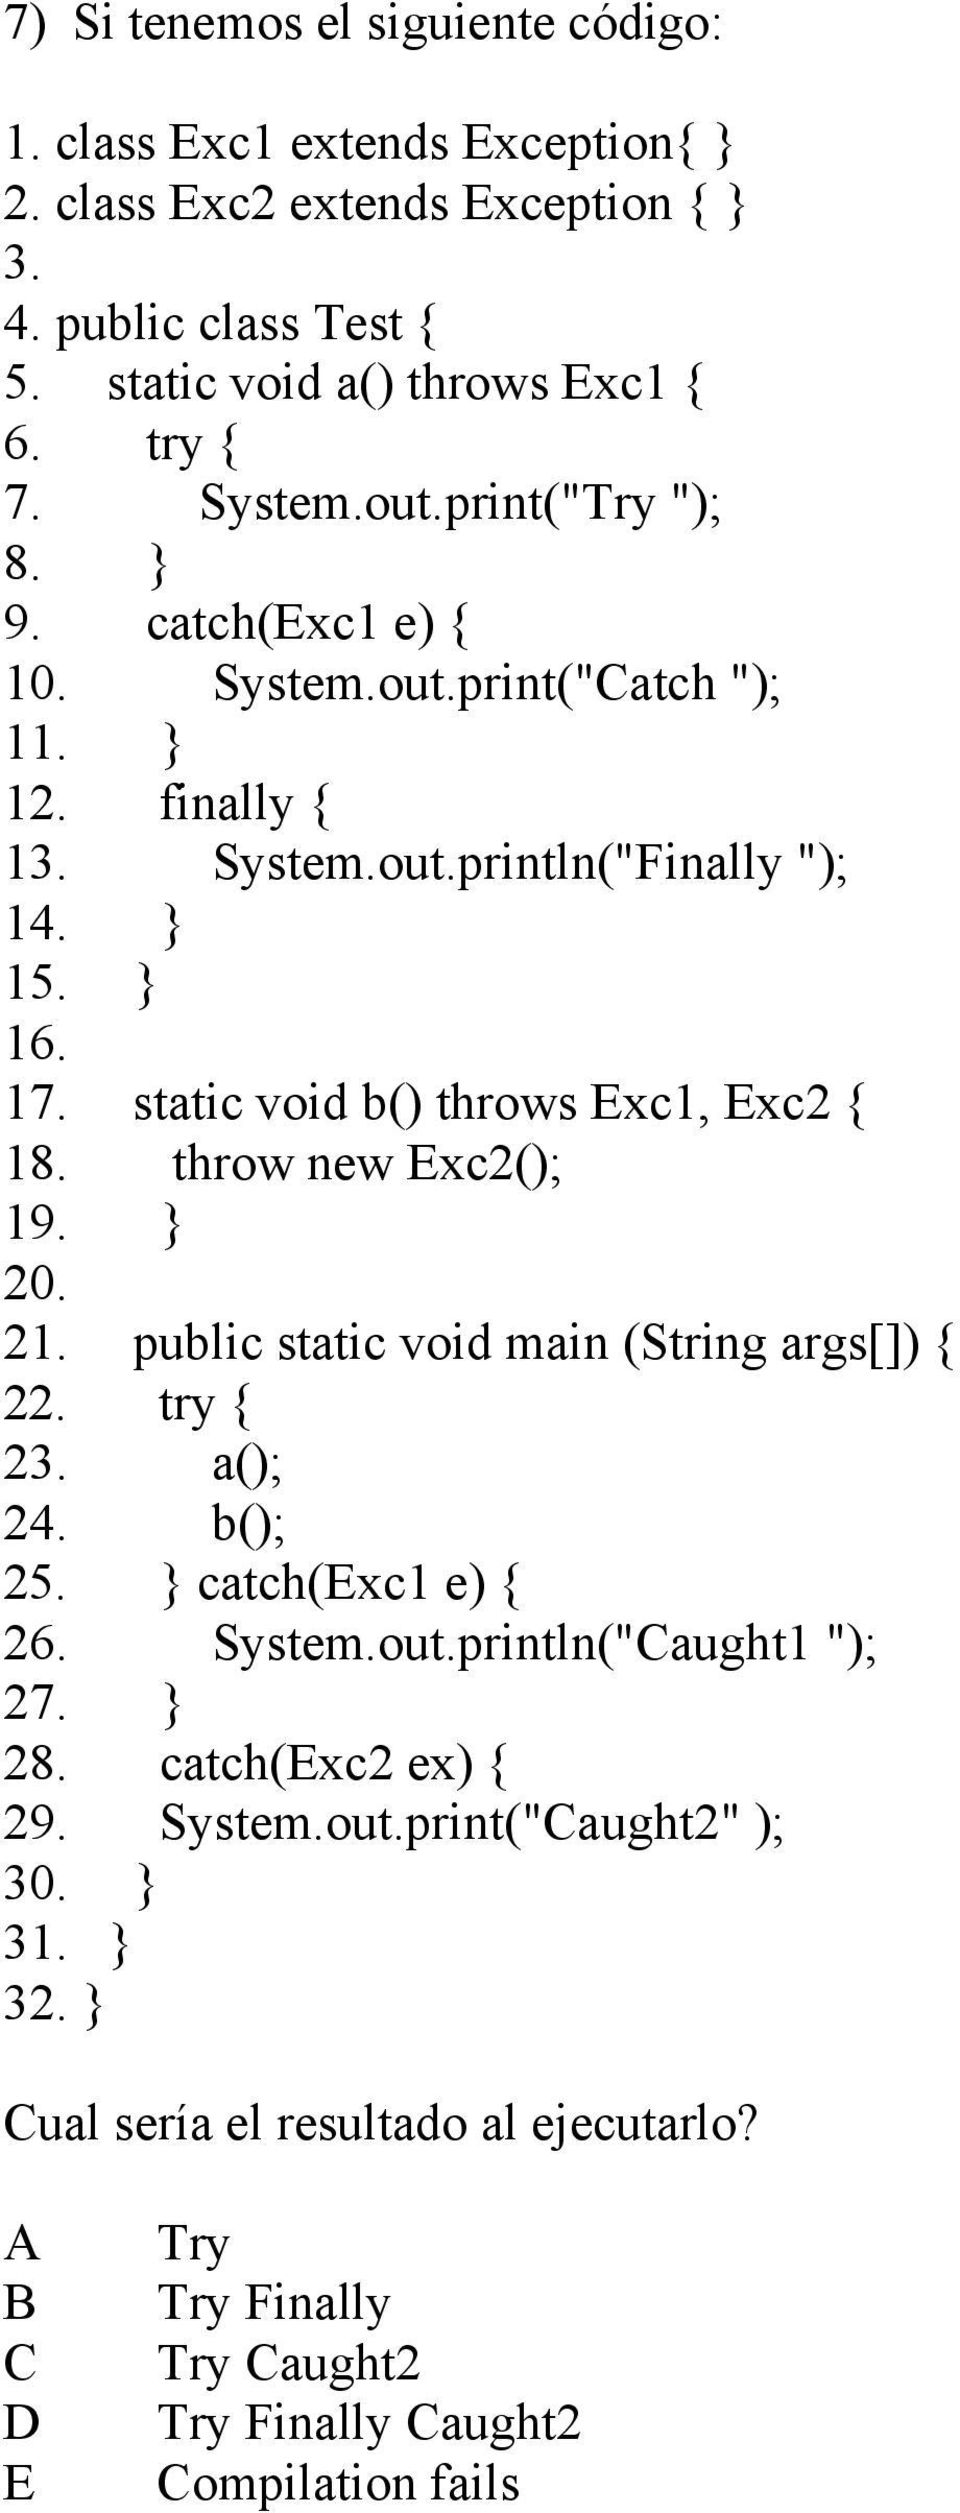 static void b() throws xc1, xc2 { 18. throw new xc2(); 19. } 20. 21. public static void main (String args[]) { 22. try { 23. a(); 24. b(); 25. } catch(xc1 e) { 26. System.out.